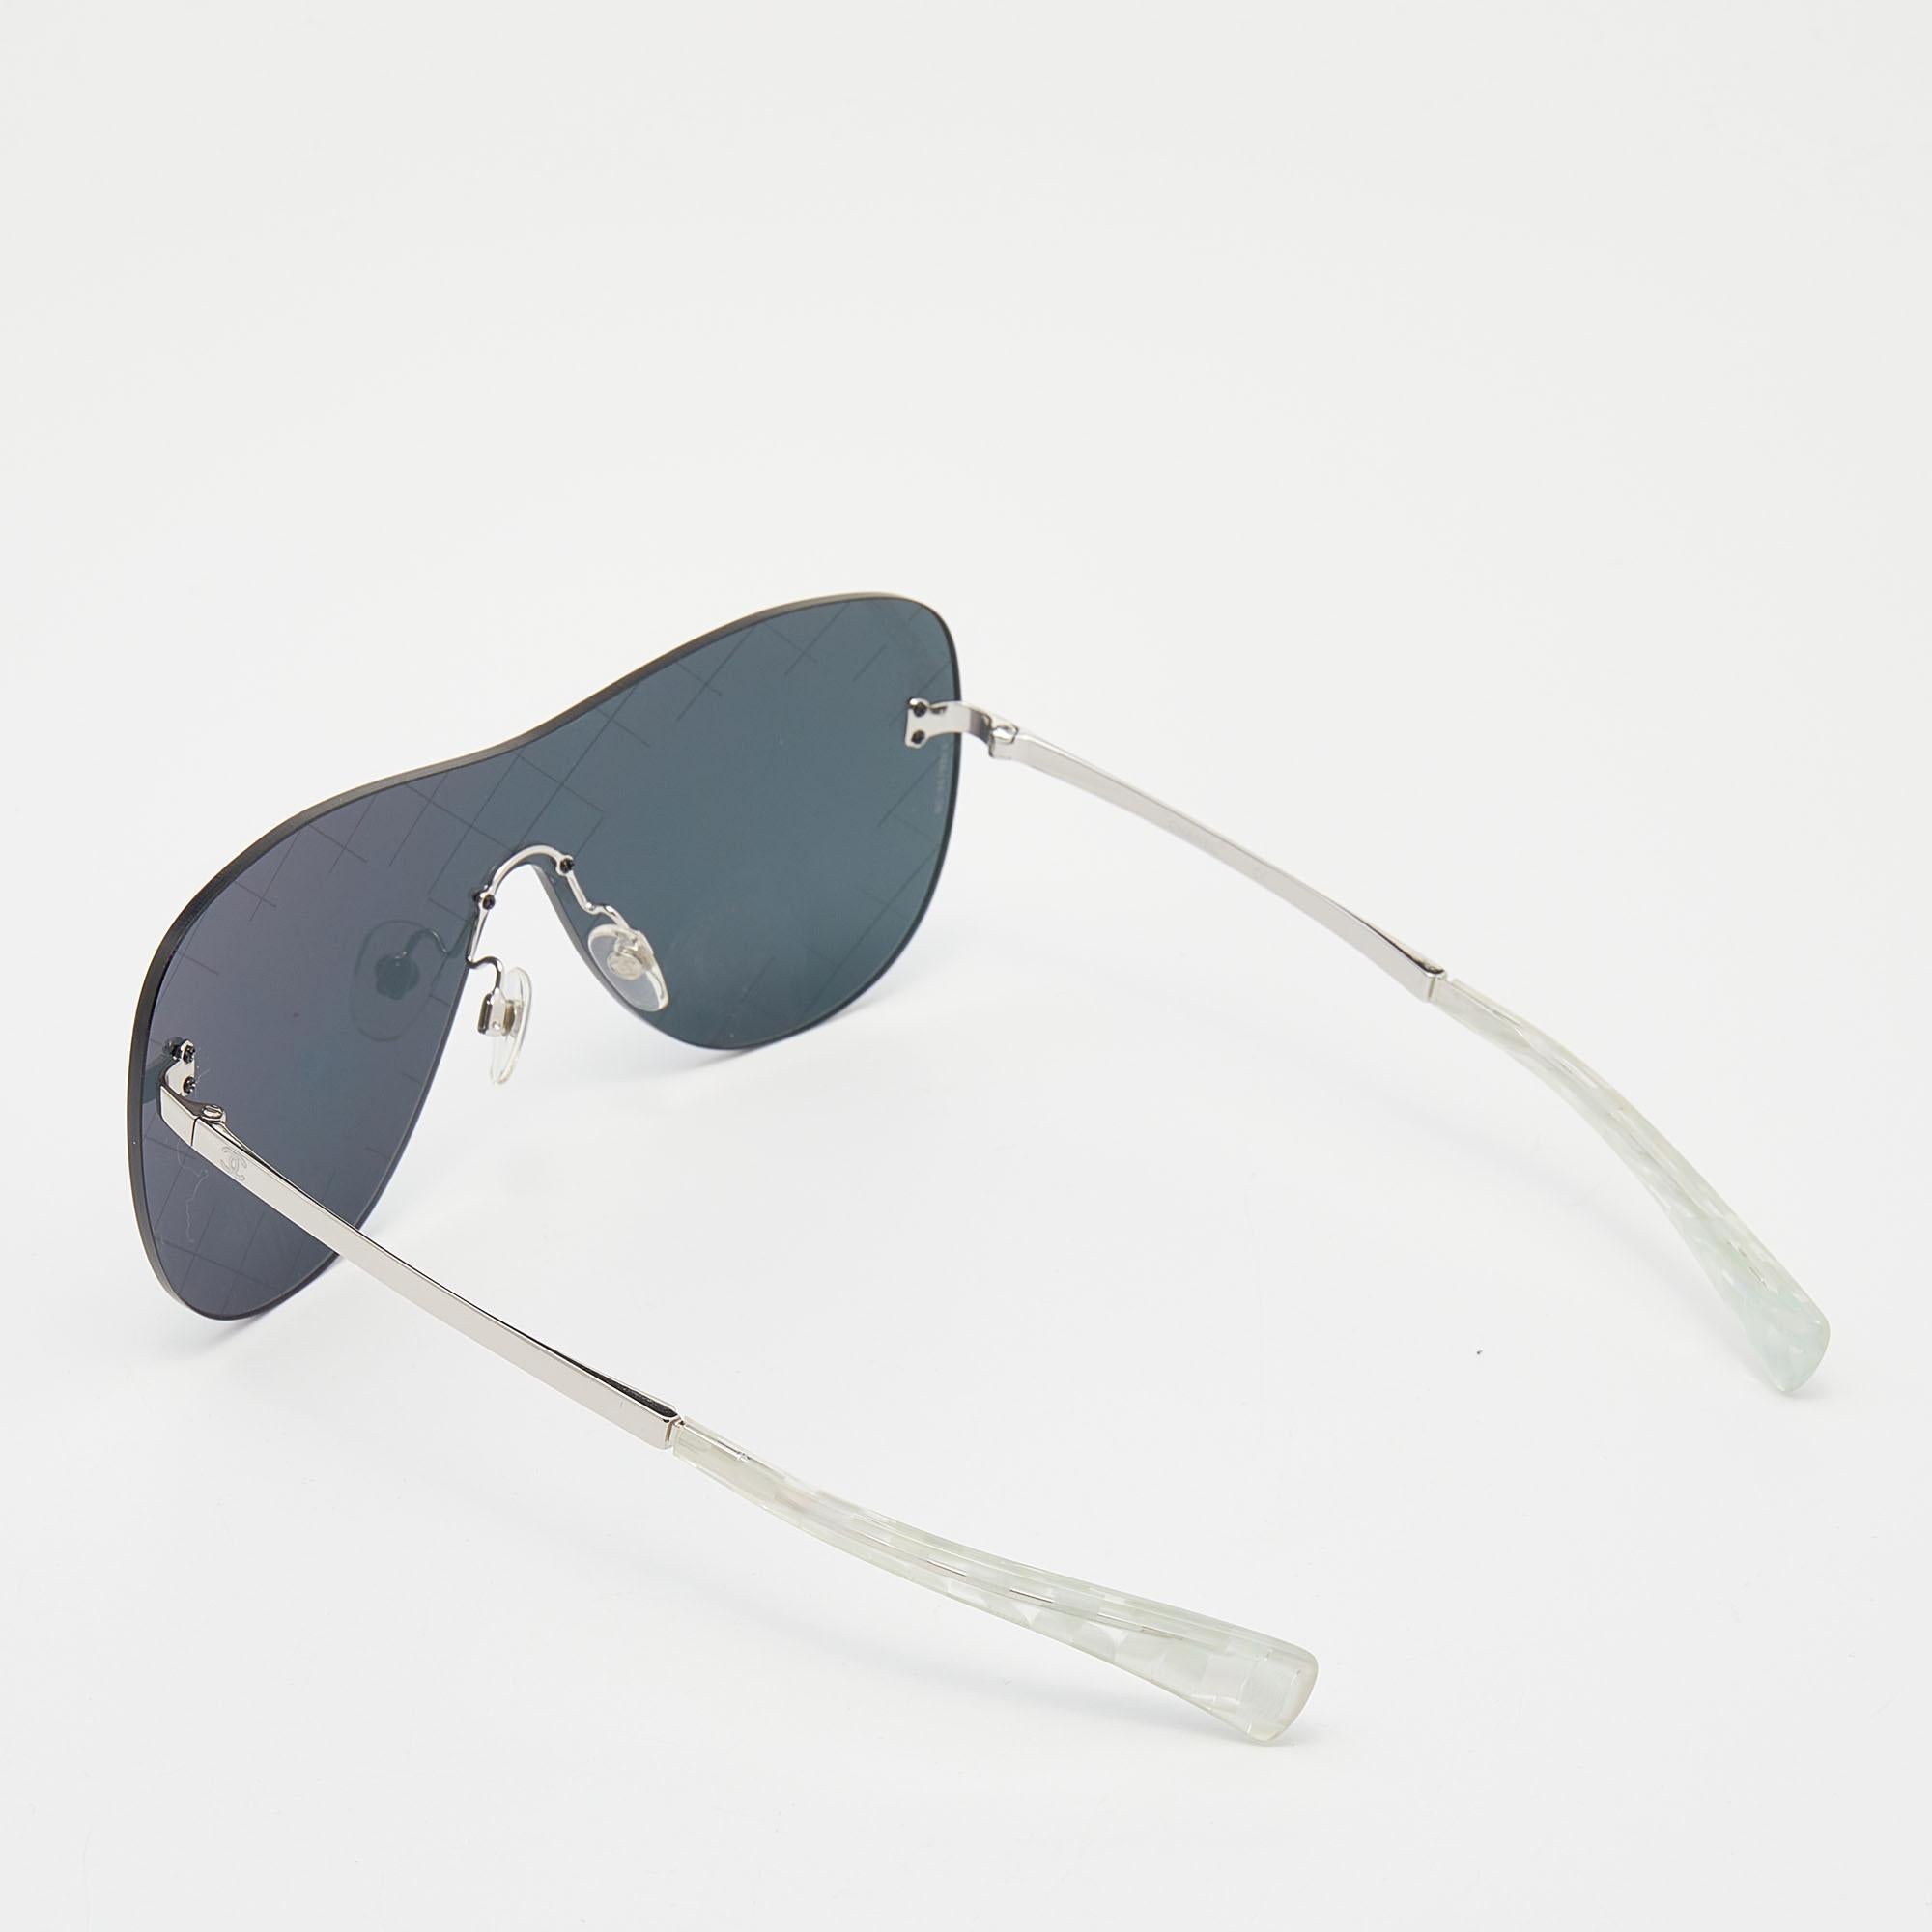 These chic sunglasses have exaggerated rimless mirror lenses with a quilting effect at the edge of the lens. The arms are made of silver-tone metal and feature a small etched CC logo at the hinge and clear patterned tips. These fabulous Chanel